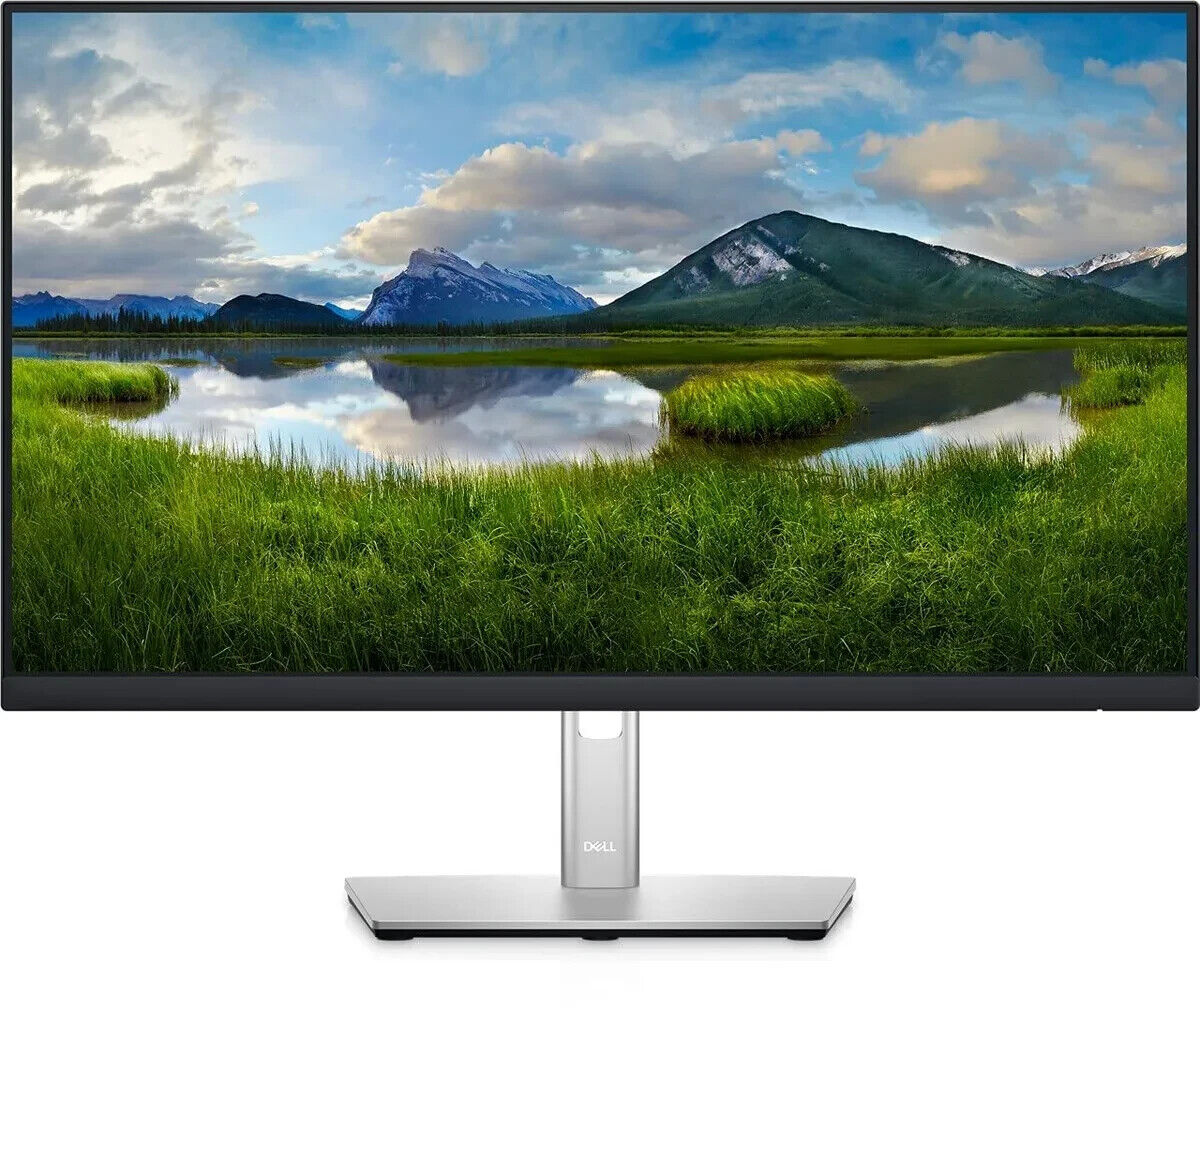 P2422H Full HD 1080p IPS Technology | Stand Included